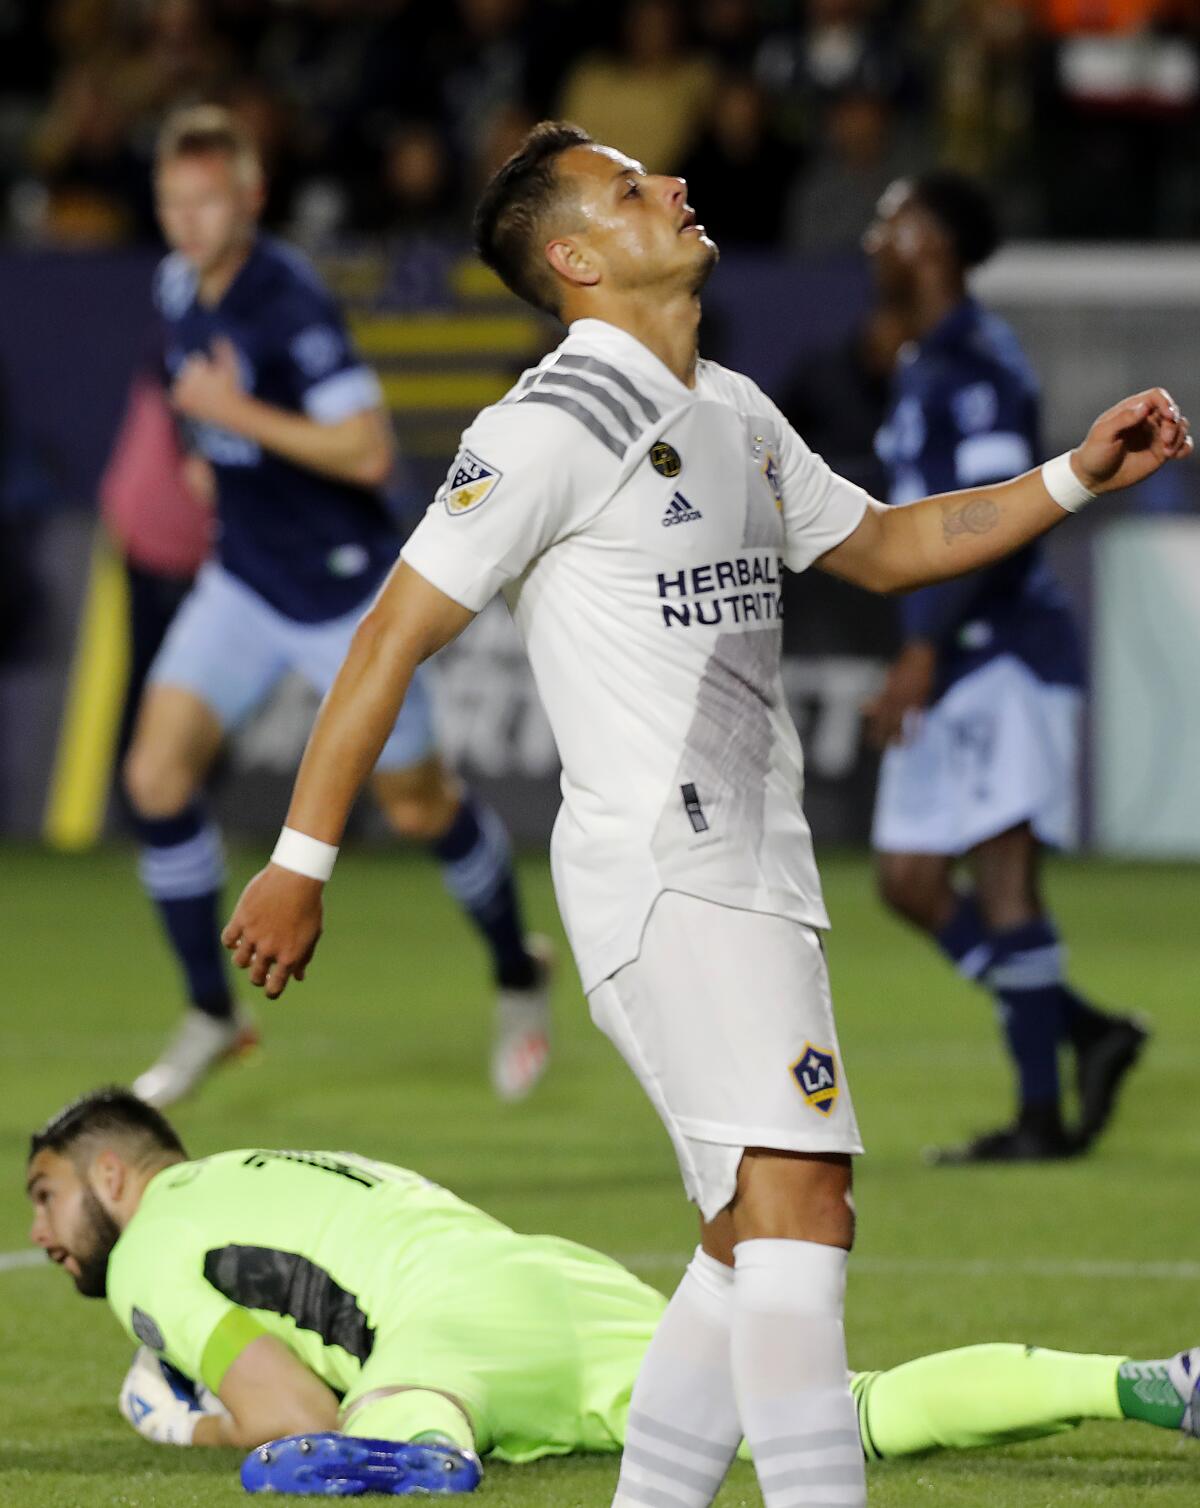 Javier "Chicharito" Hernandez reacts after Vancouver goalie Maxime Crepeau makes a save during the first half of a game on March 7, 2020, at Dignity Health Sports Park.